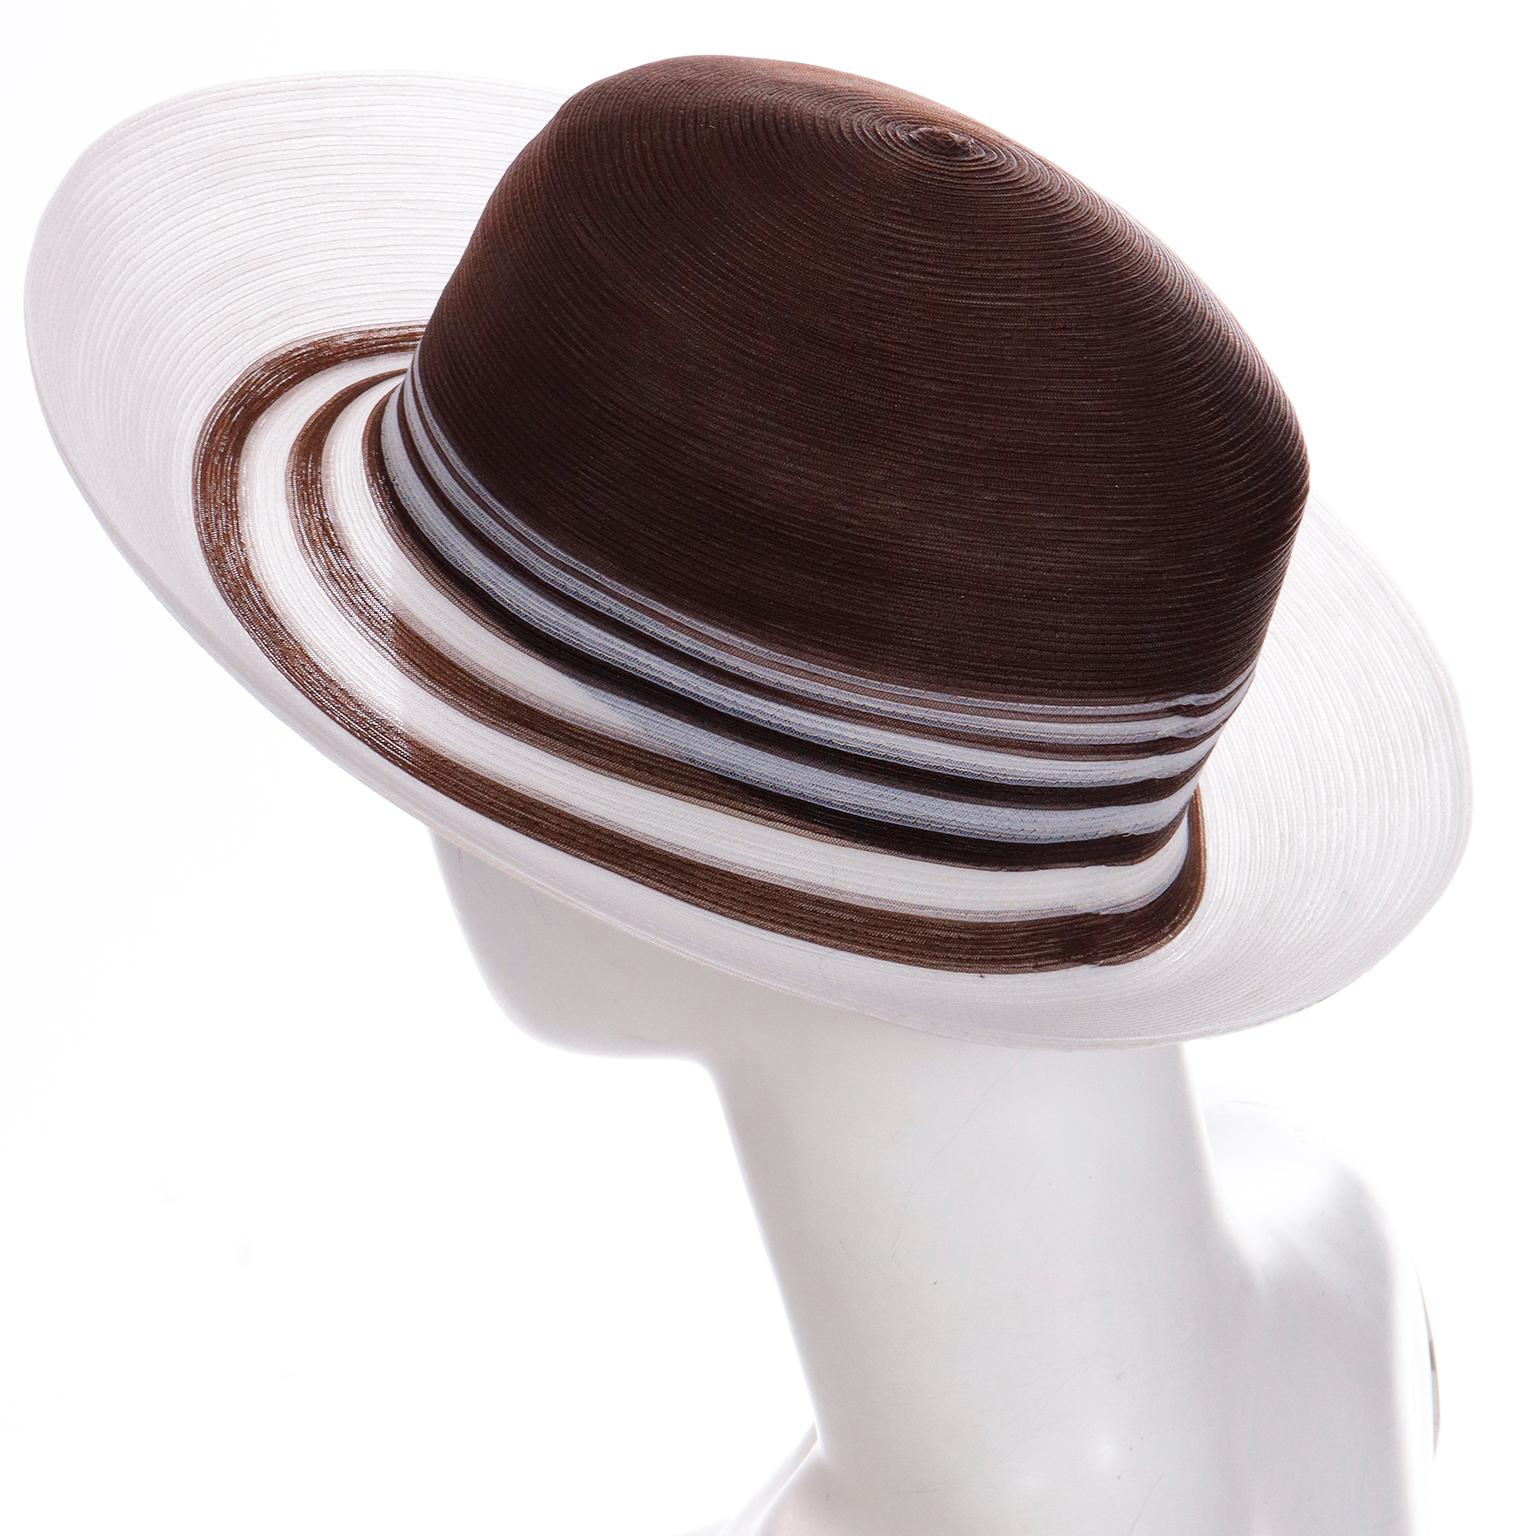 Black Patricia Underwood Vintage Brown and White Striped Summer Hat For Sale